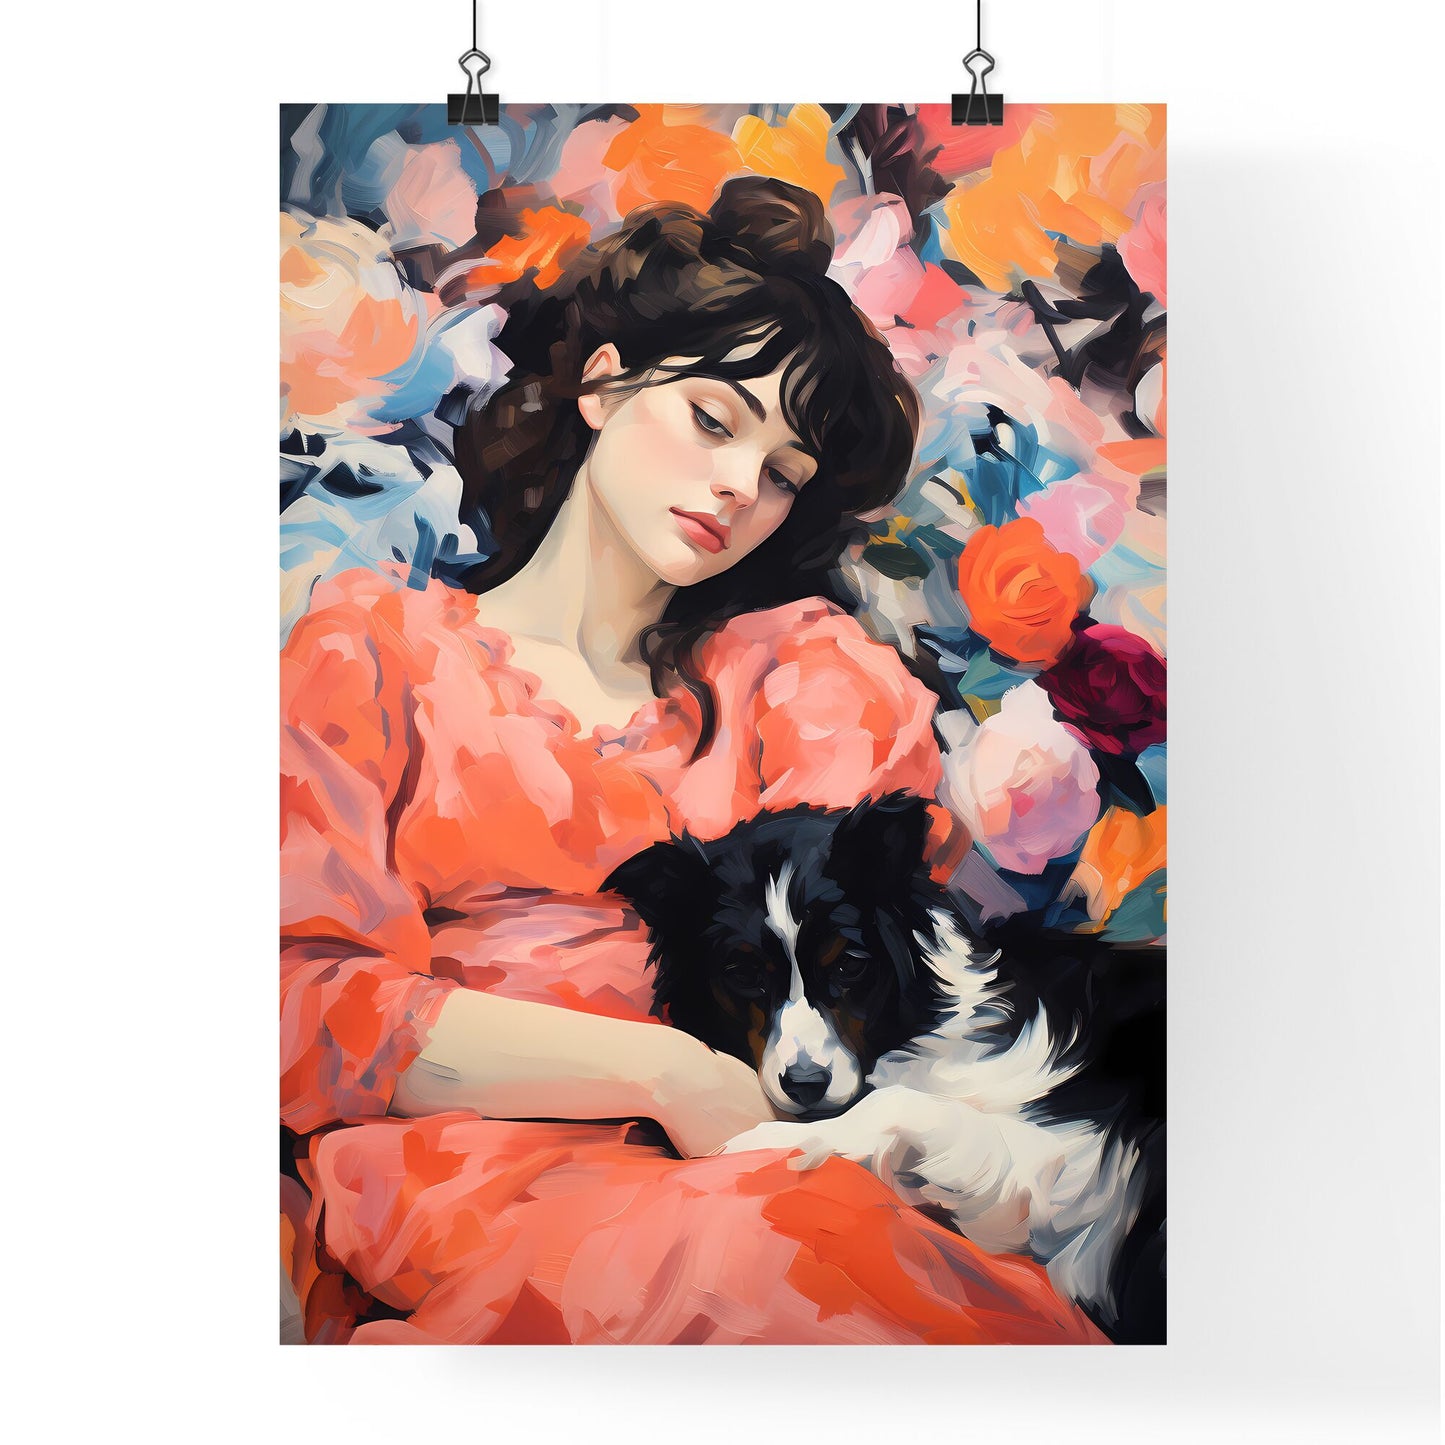 Coco Chanel Smells O A Flacon - A Woman In A Dress With A Dog Default Title